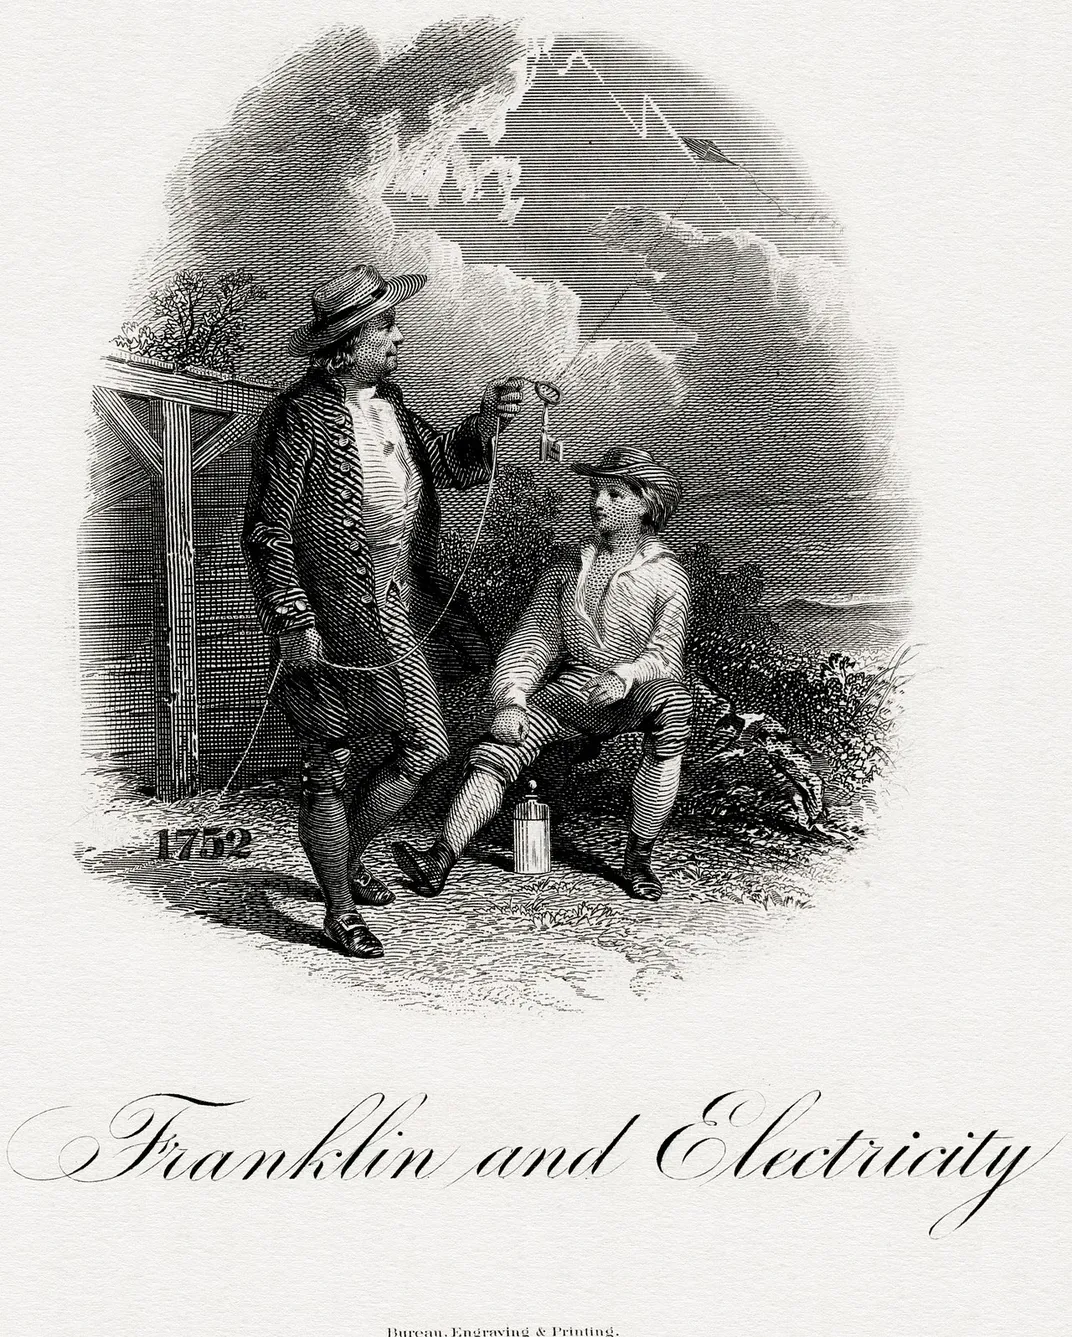 When Benjamin Franklin was shocked by trying to electrocute a turkey